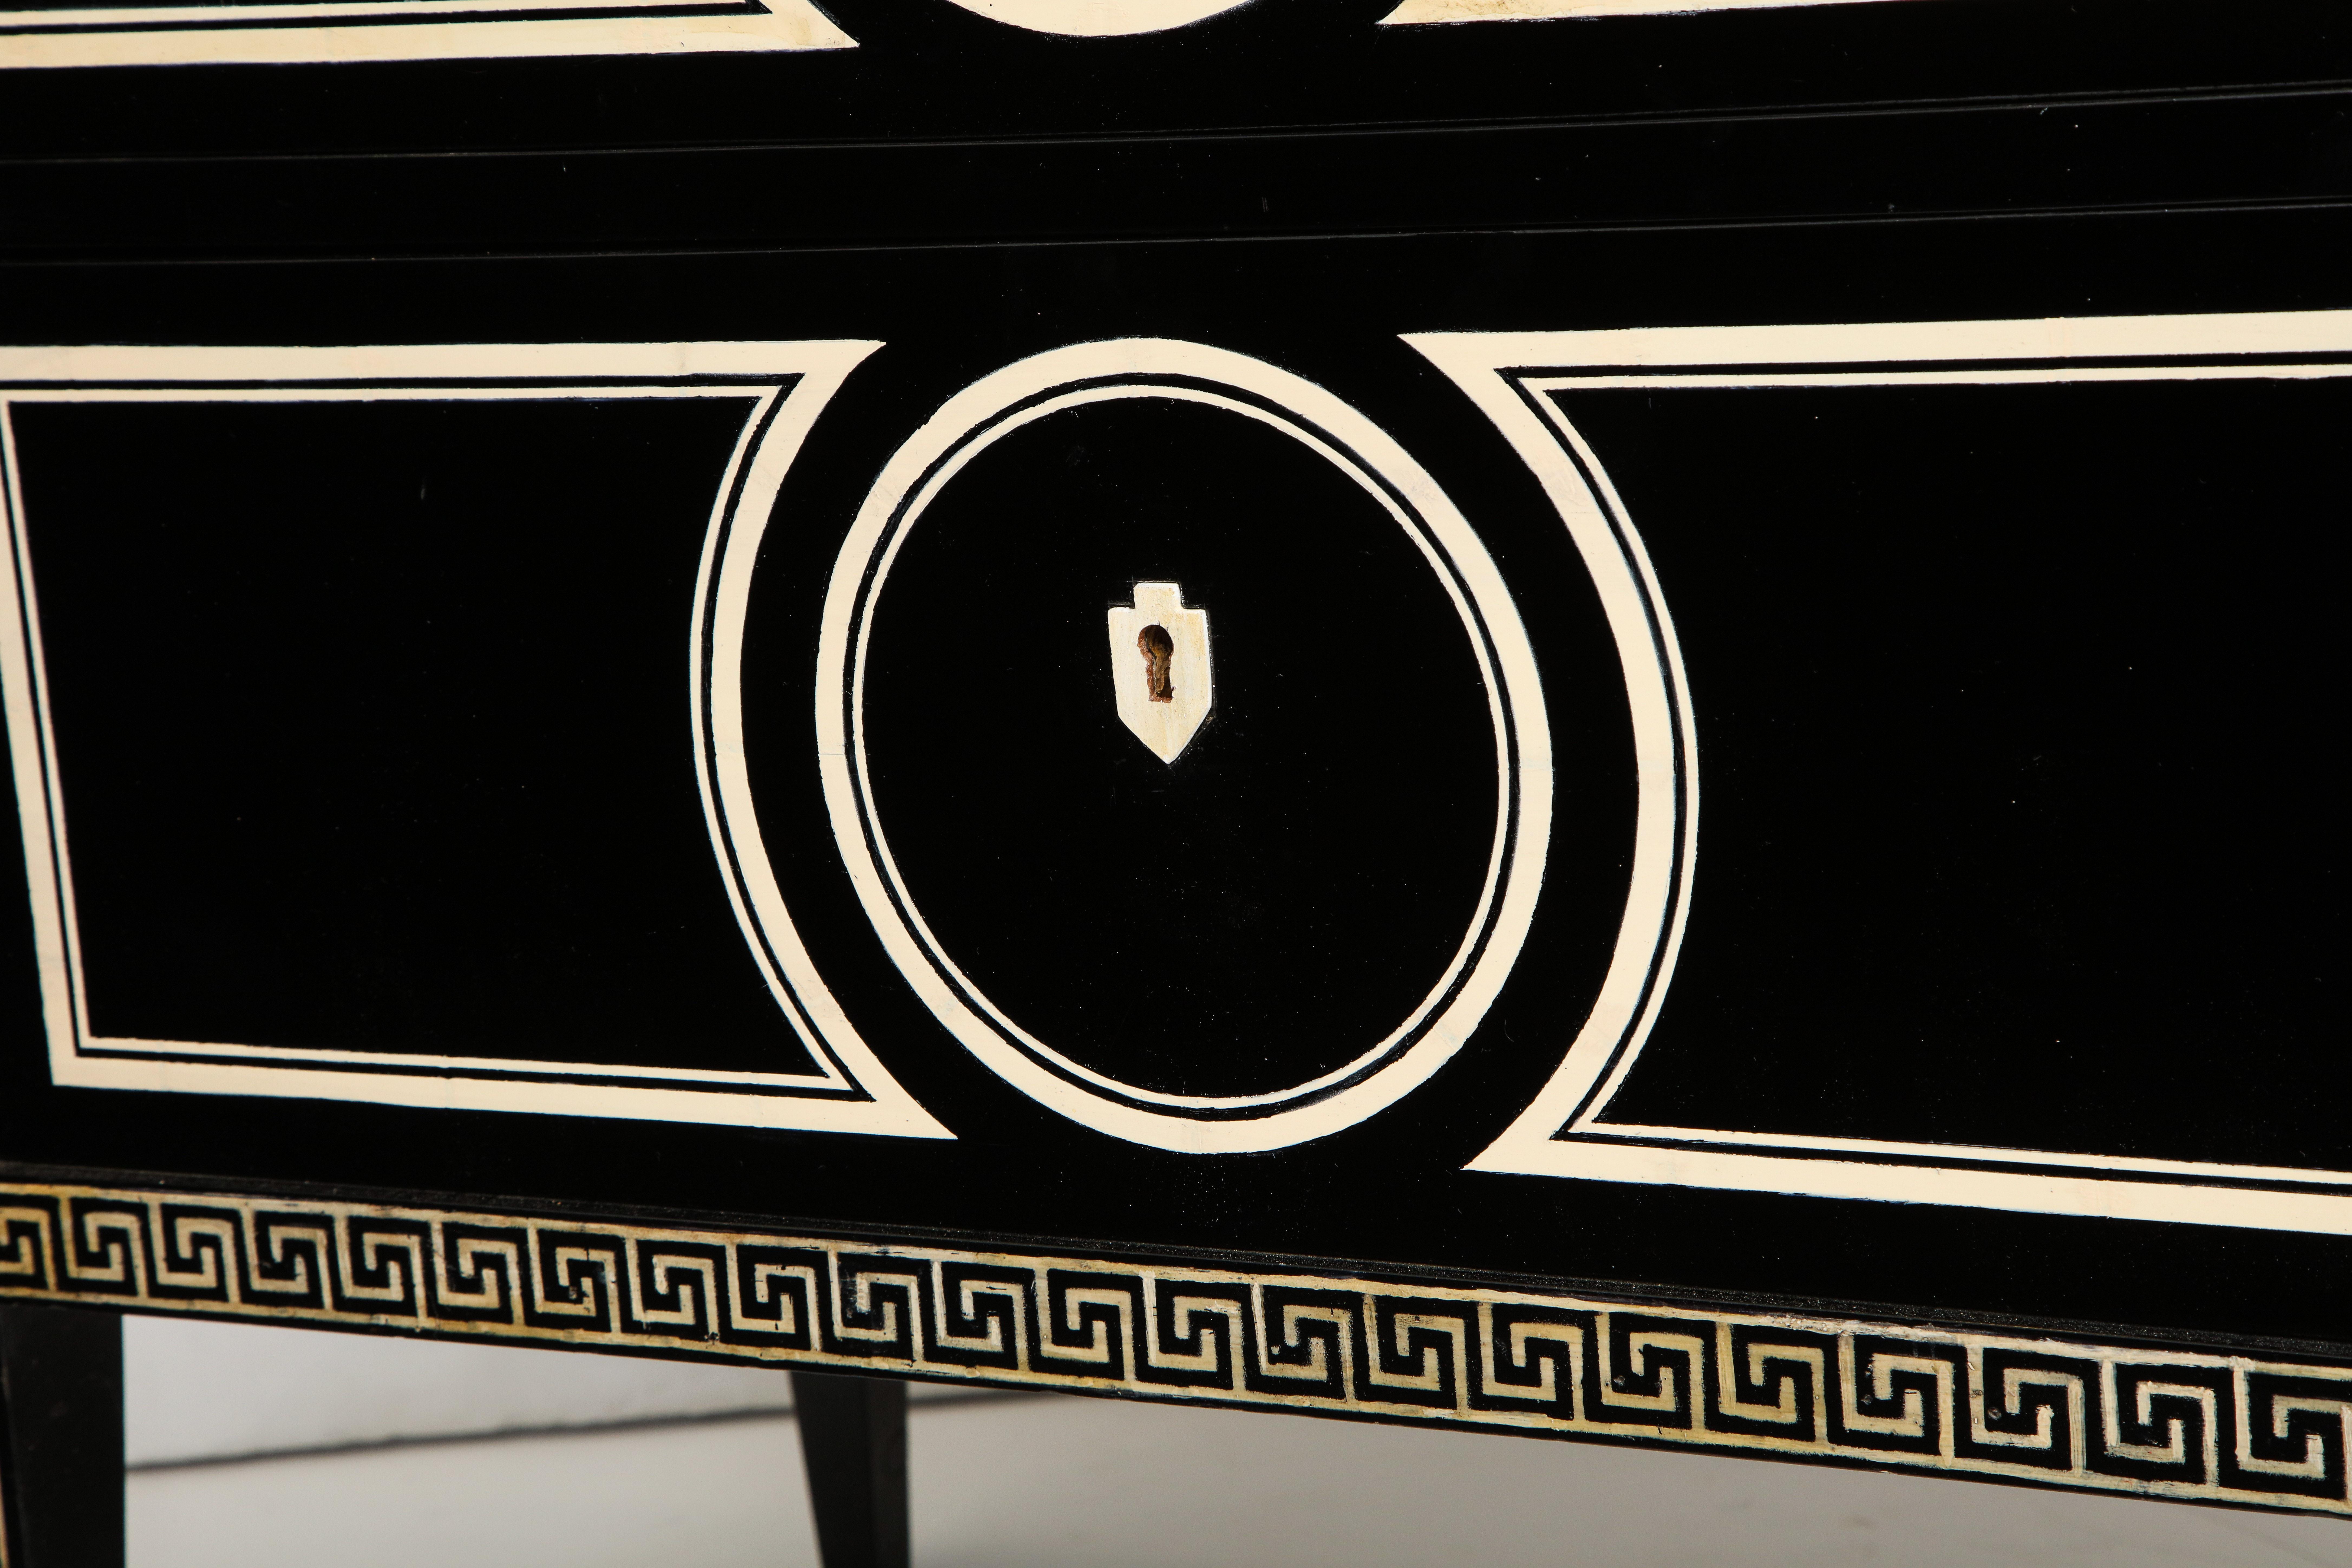 Graphic black and white custom ebonized commode featuring neoclassic hand painted decoration.
Lead Time 8 to 10 weeks.